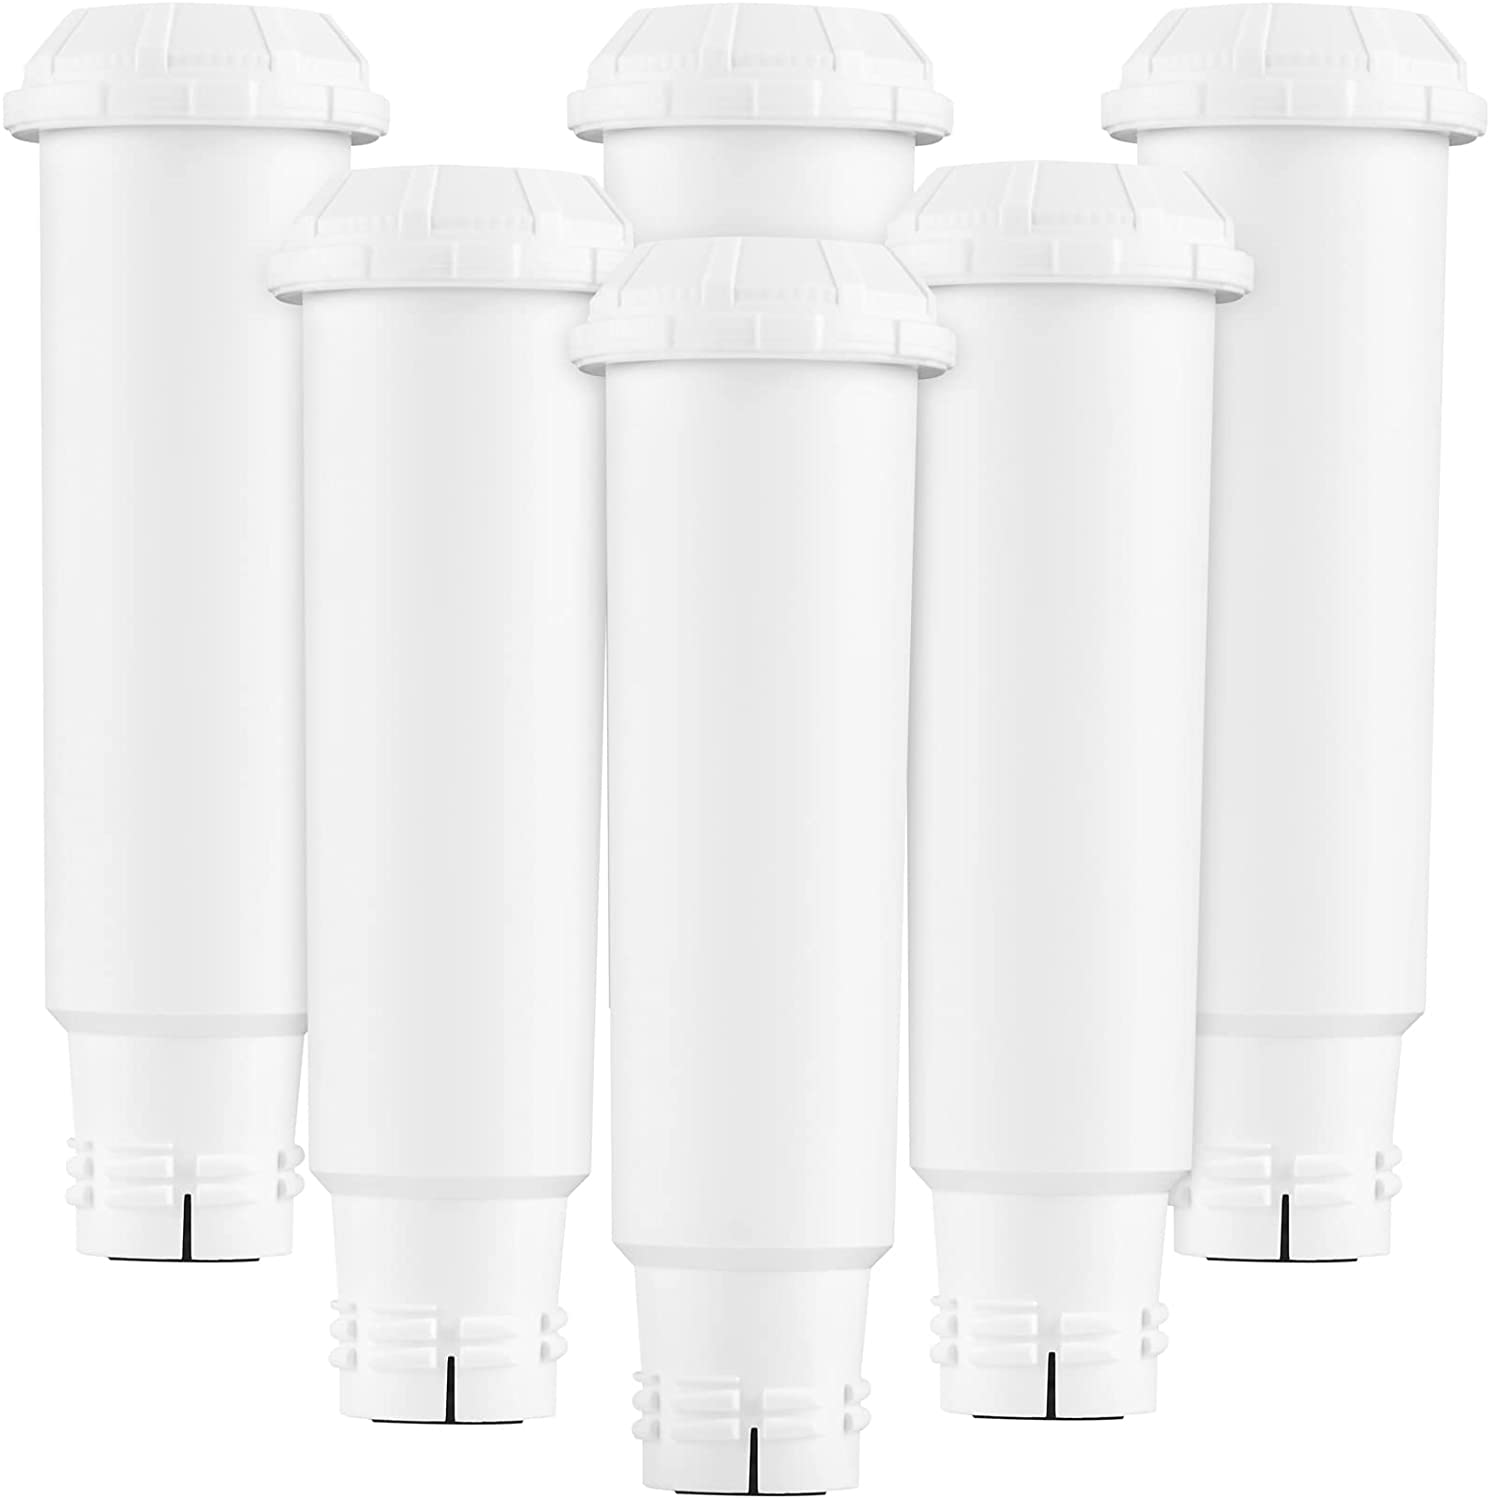 AQUALI 6 x replacement filters compatible with Nivona and Melitta coffee machines, softens hard water, improves coffee taste and aroma, lasts two months from installation